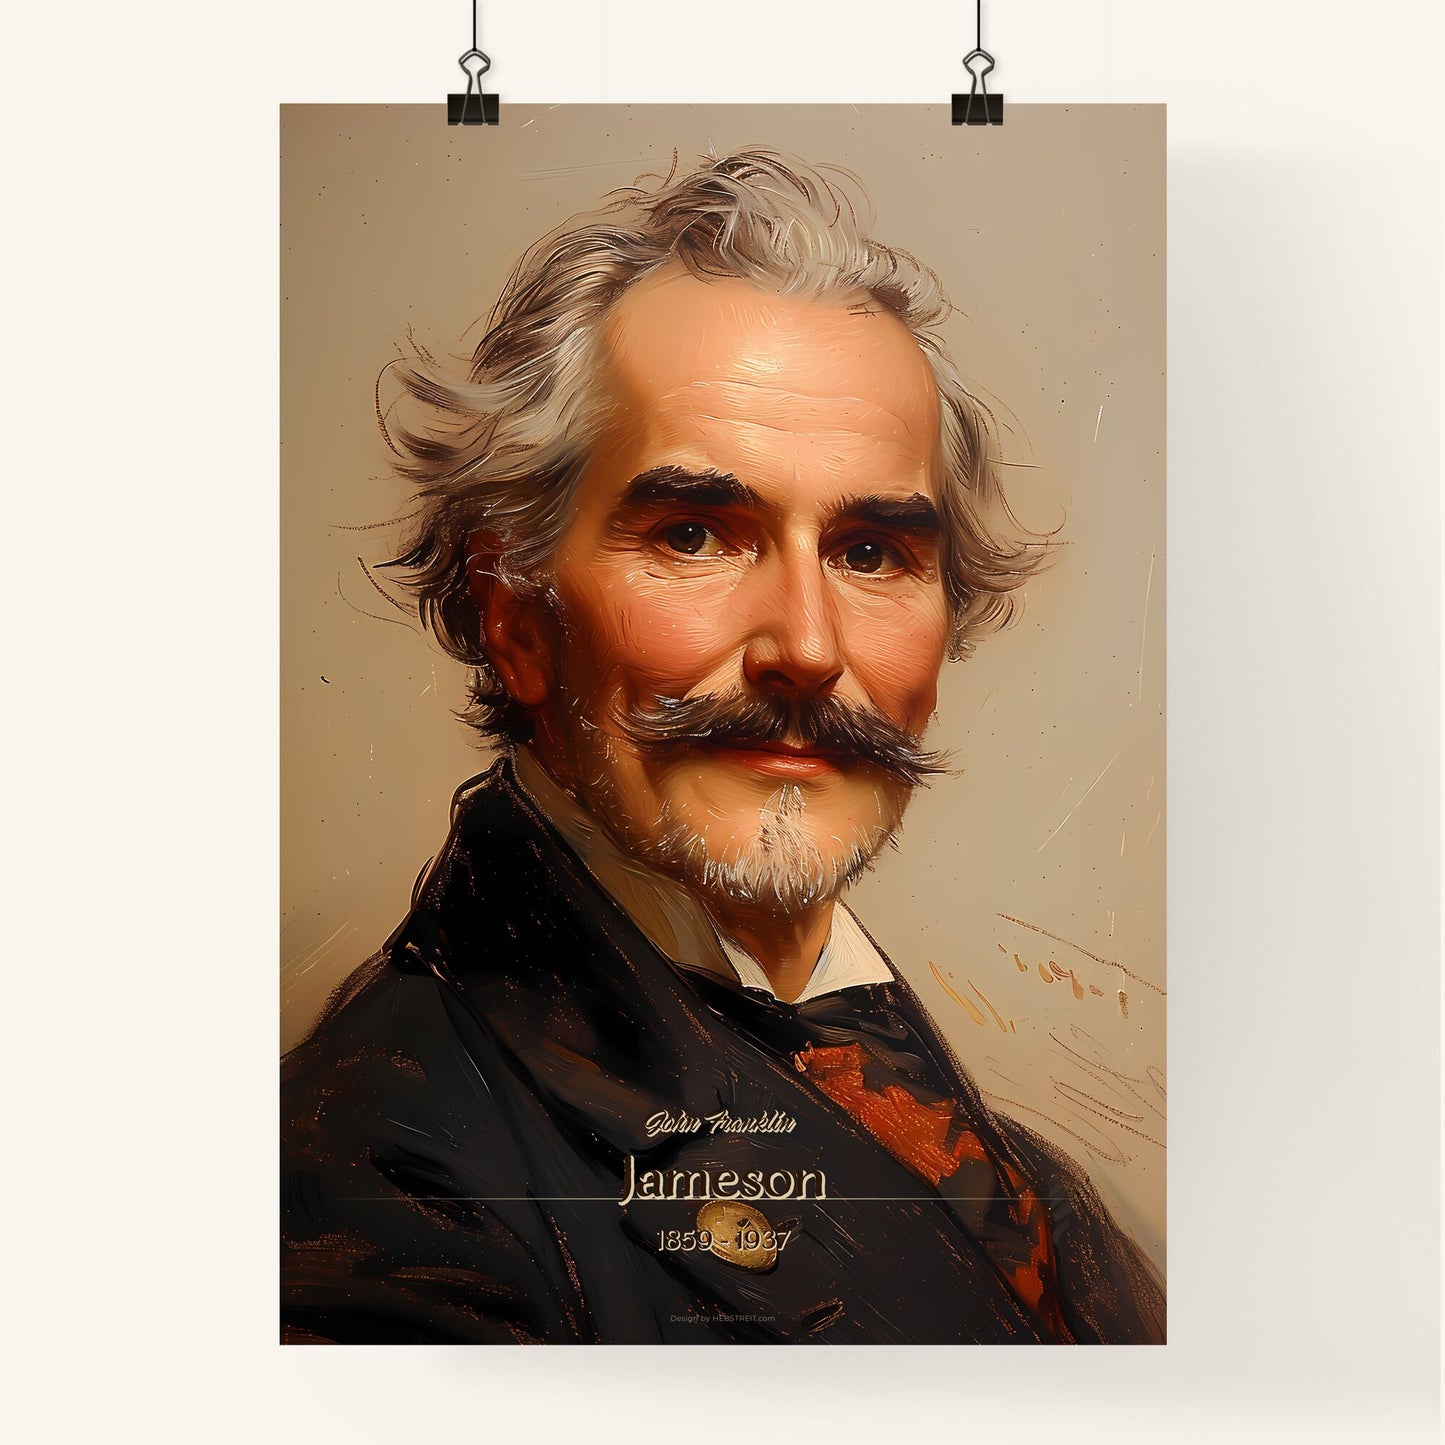 John Franklin, Jameson, 1859 - 1937, A Poster of a man with a mustache Default Title